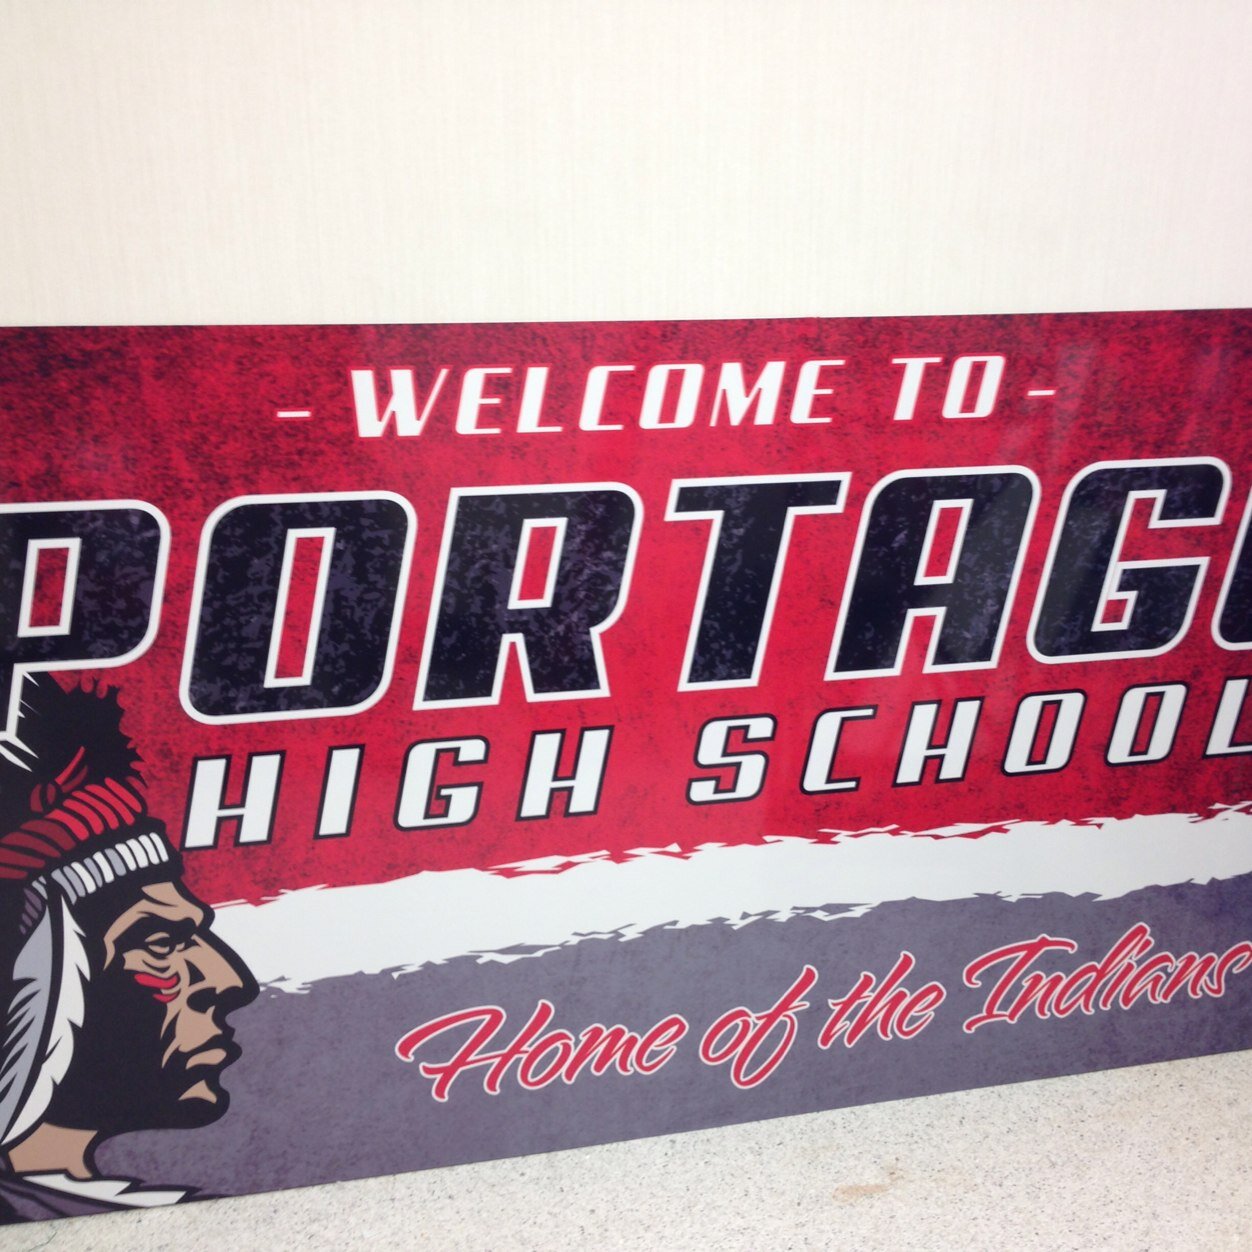 Information related to Portage High School in Portage, Indiana.